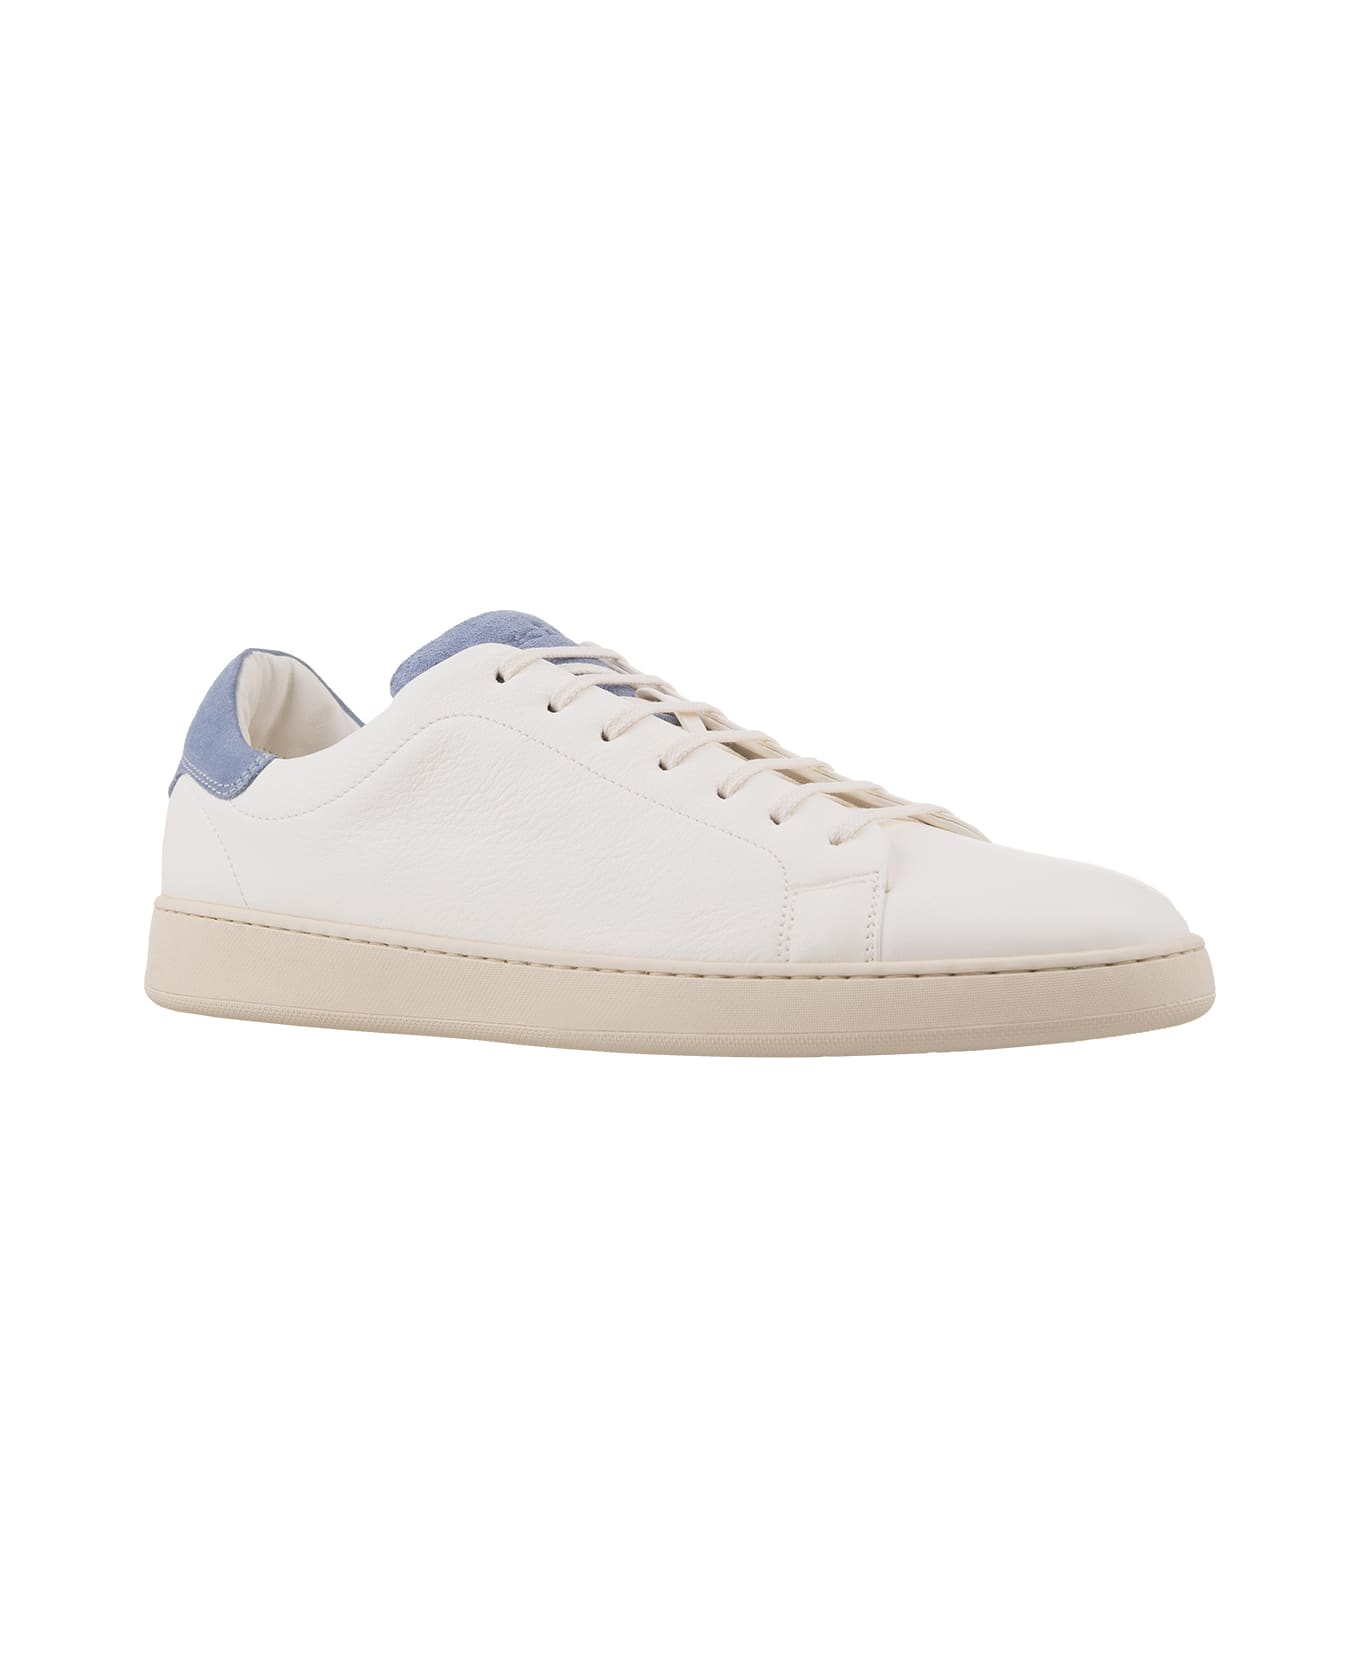 Kiton White Leather Sneakers With Light Blue Details - Blue スニーカー